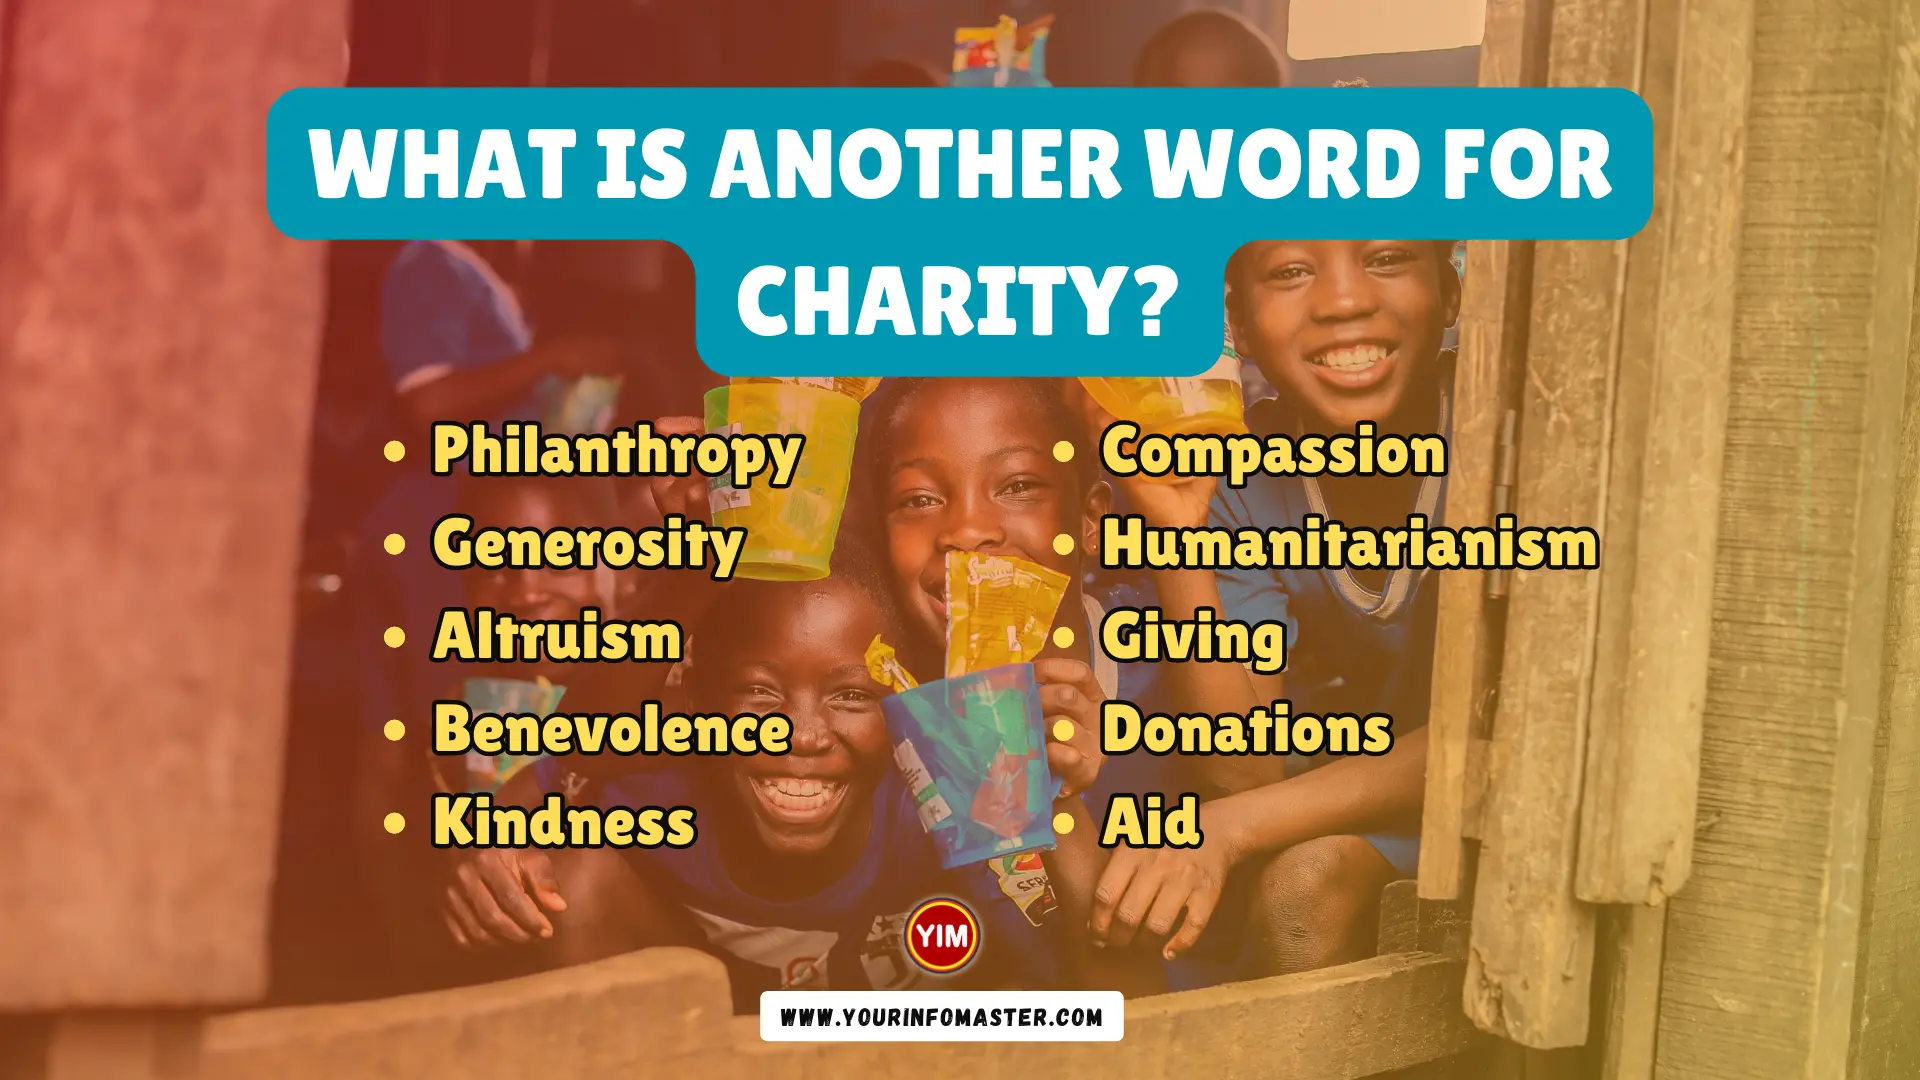 What is another word for Charity